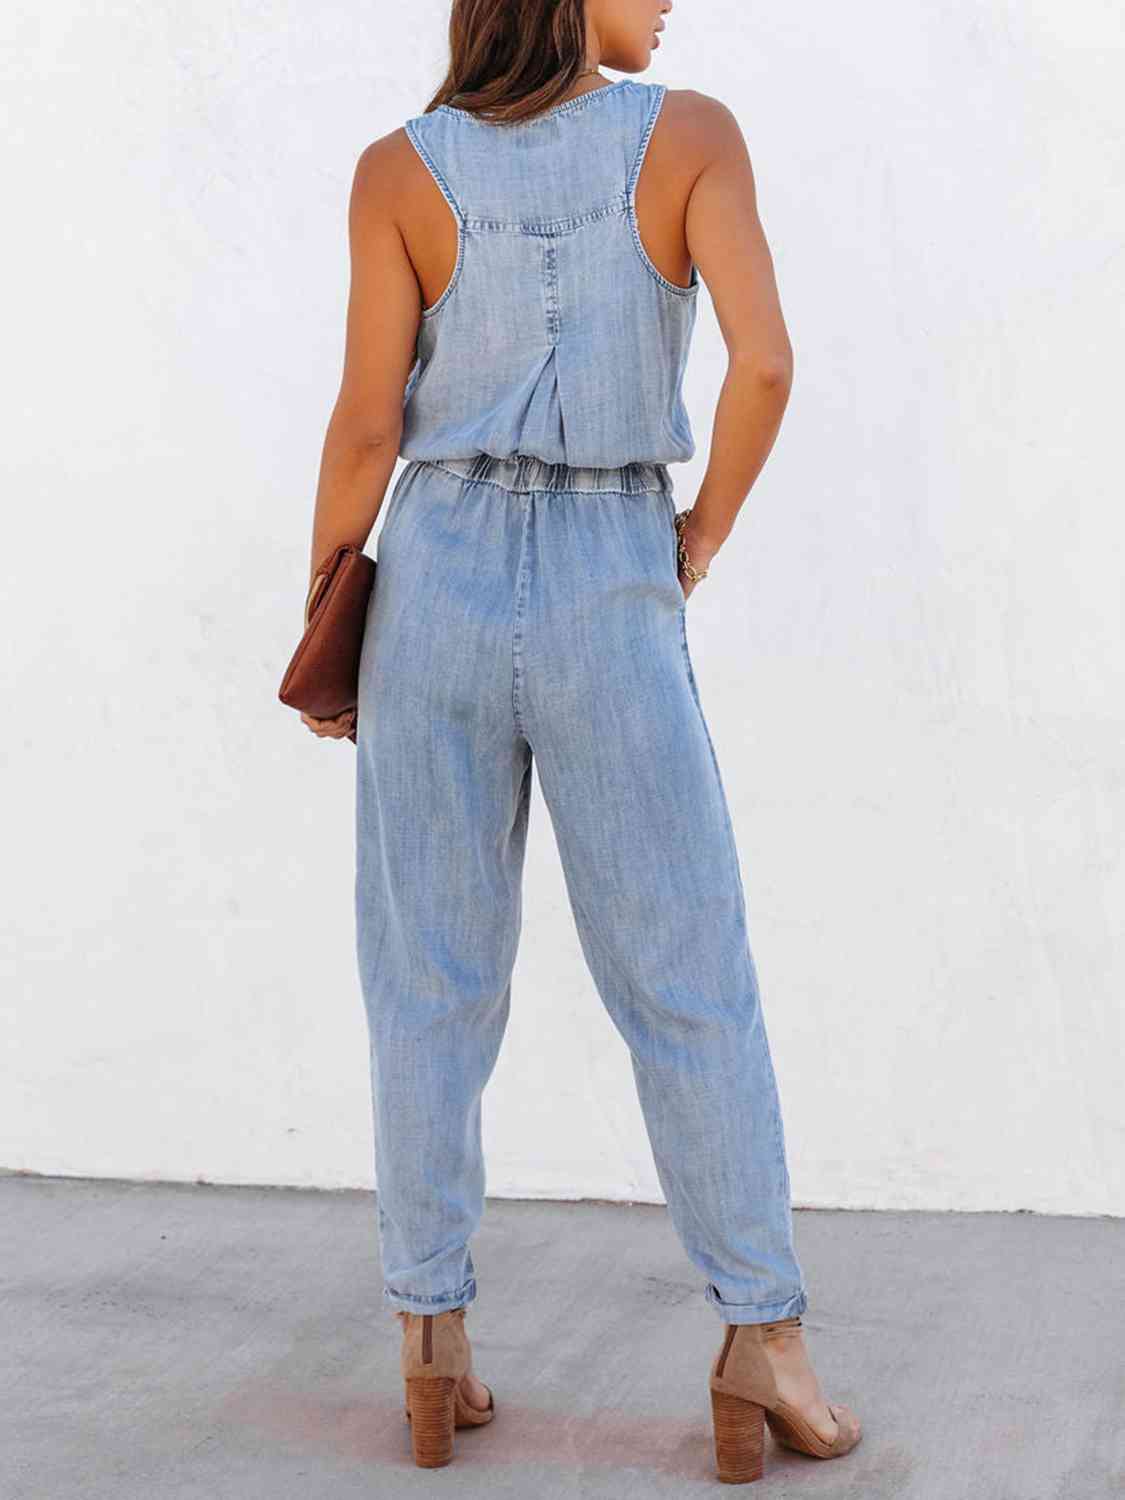 Oh What A Night Drawstring Waist Sleeveless Jumpsuit - 3 Colors